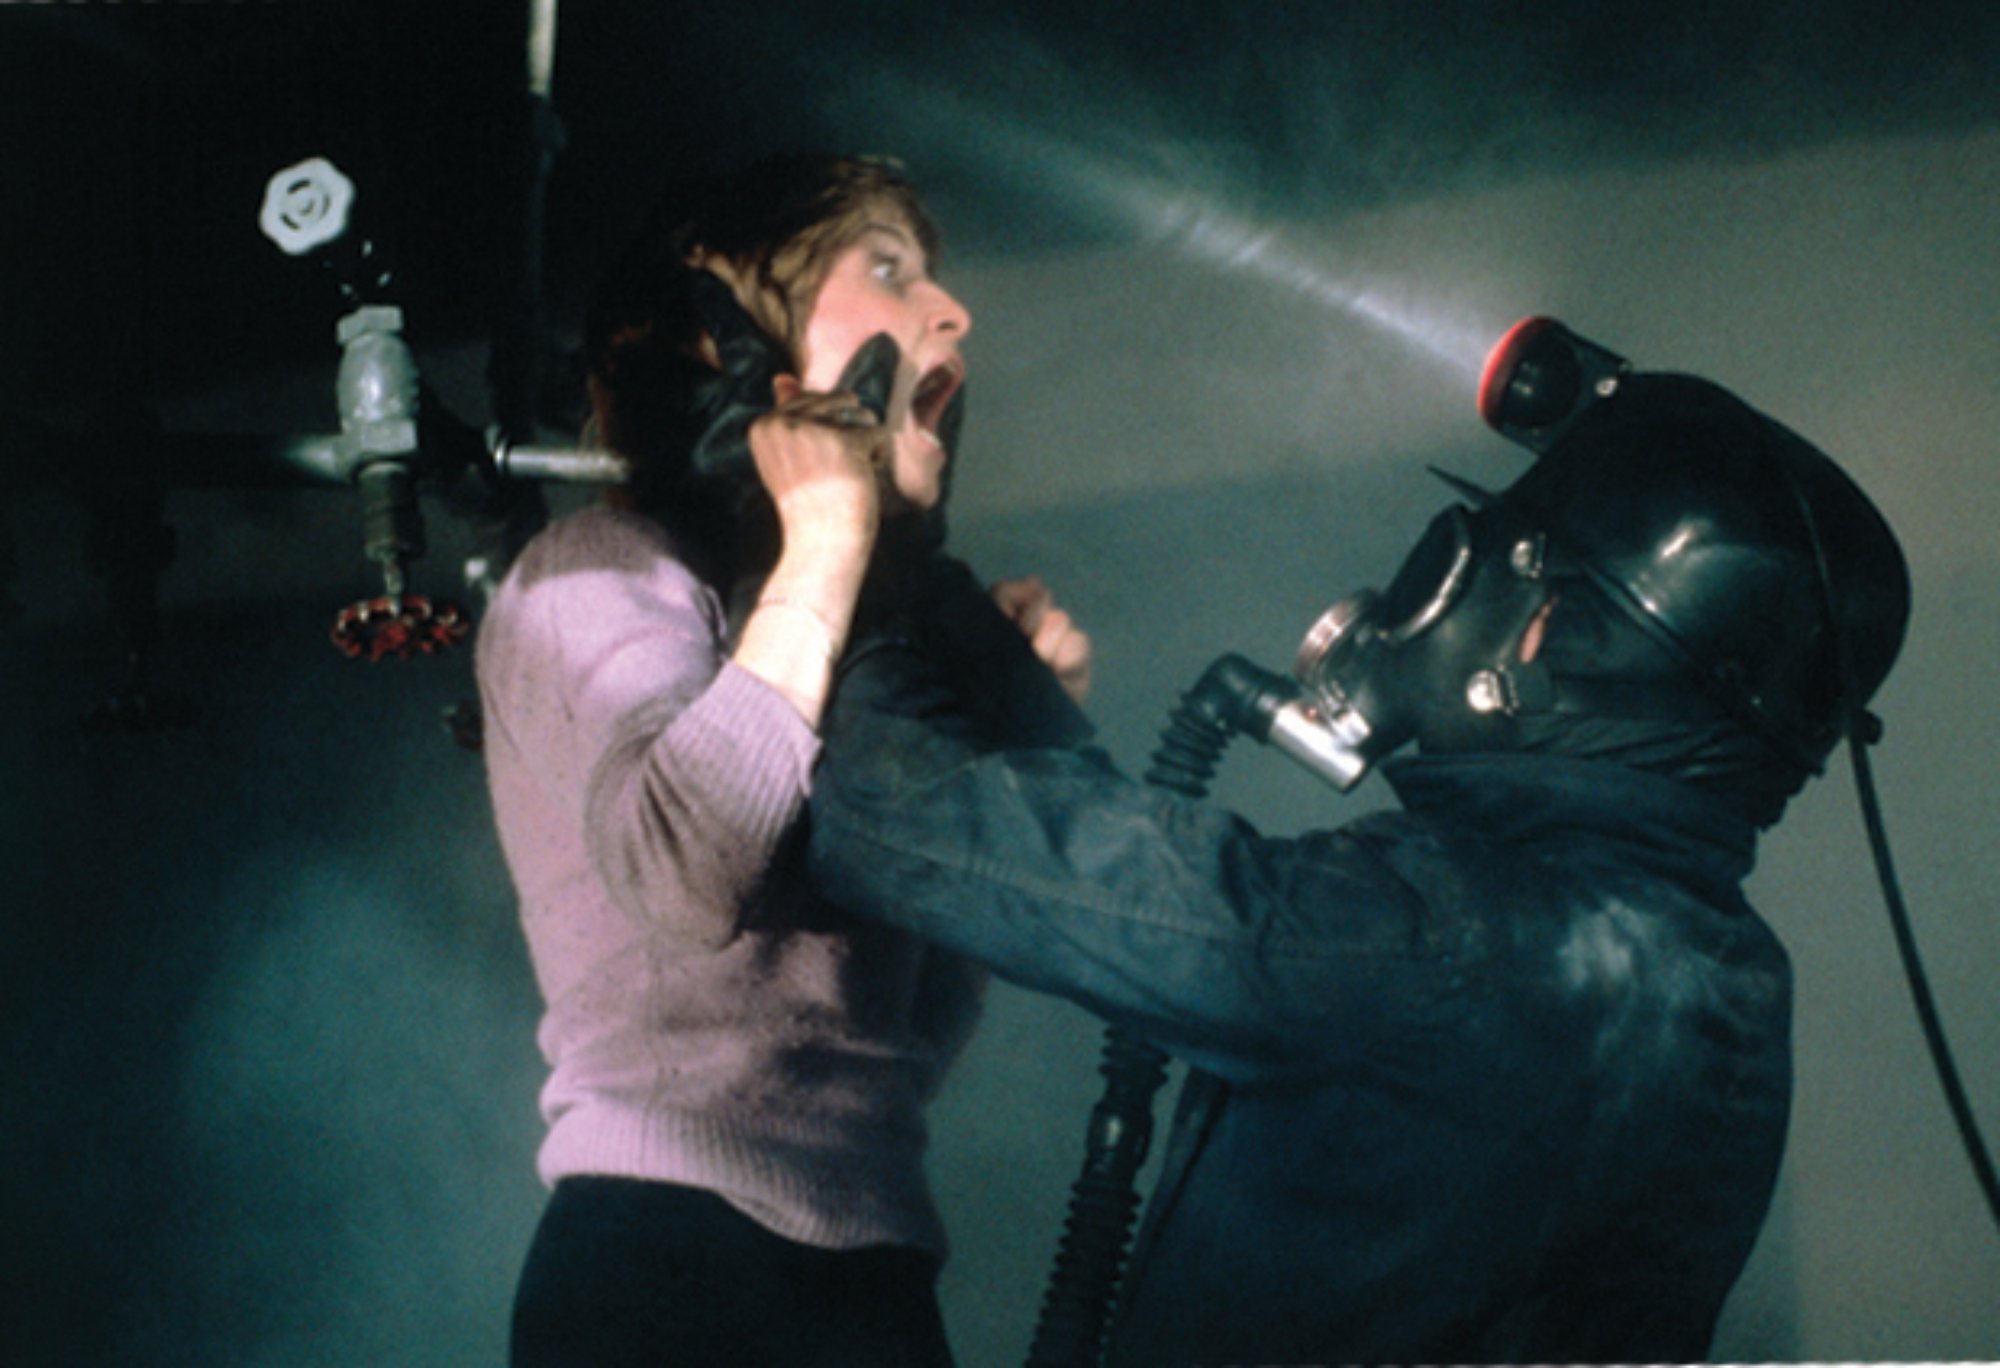 'My Bloody Valentine' Peter Cowper as Harry Warden and Helene Udy as Sylvia. Warden is holding Sylvia up by her face against a pipe.